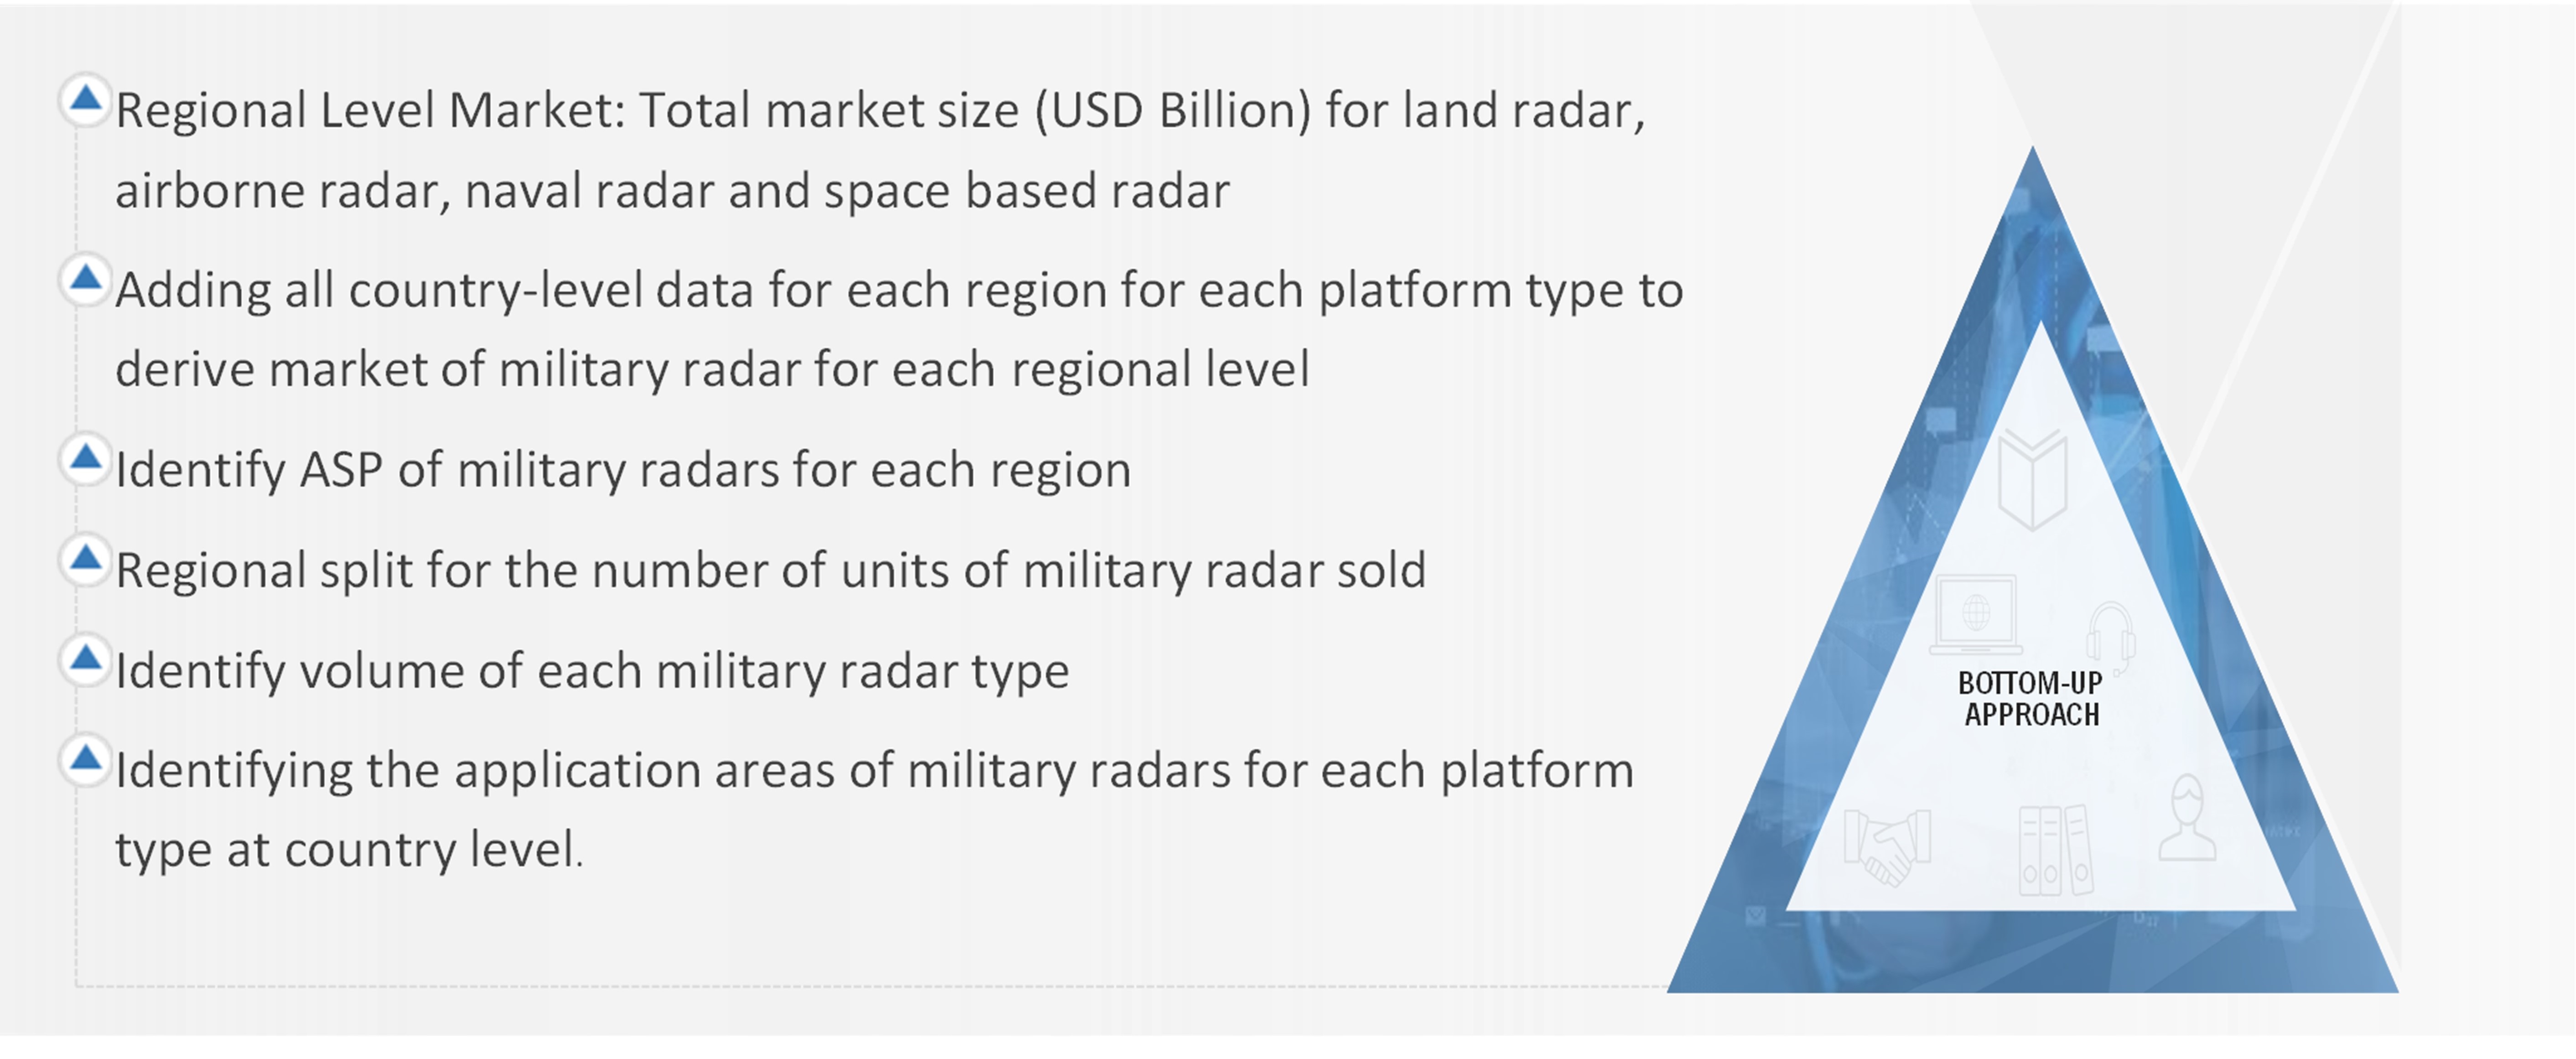 Military Radars Market Size, and Bottom-Up Approach 